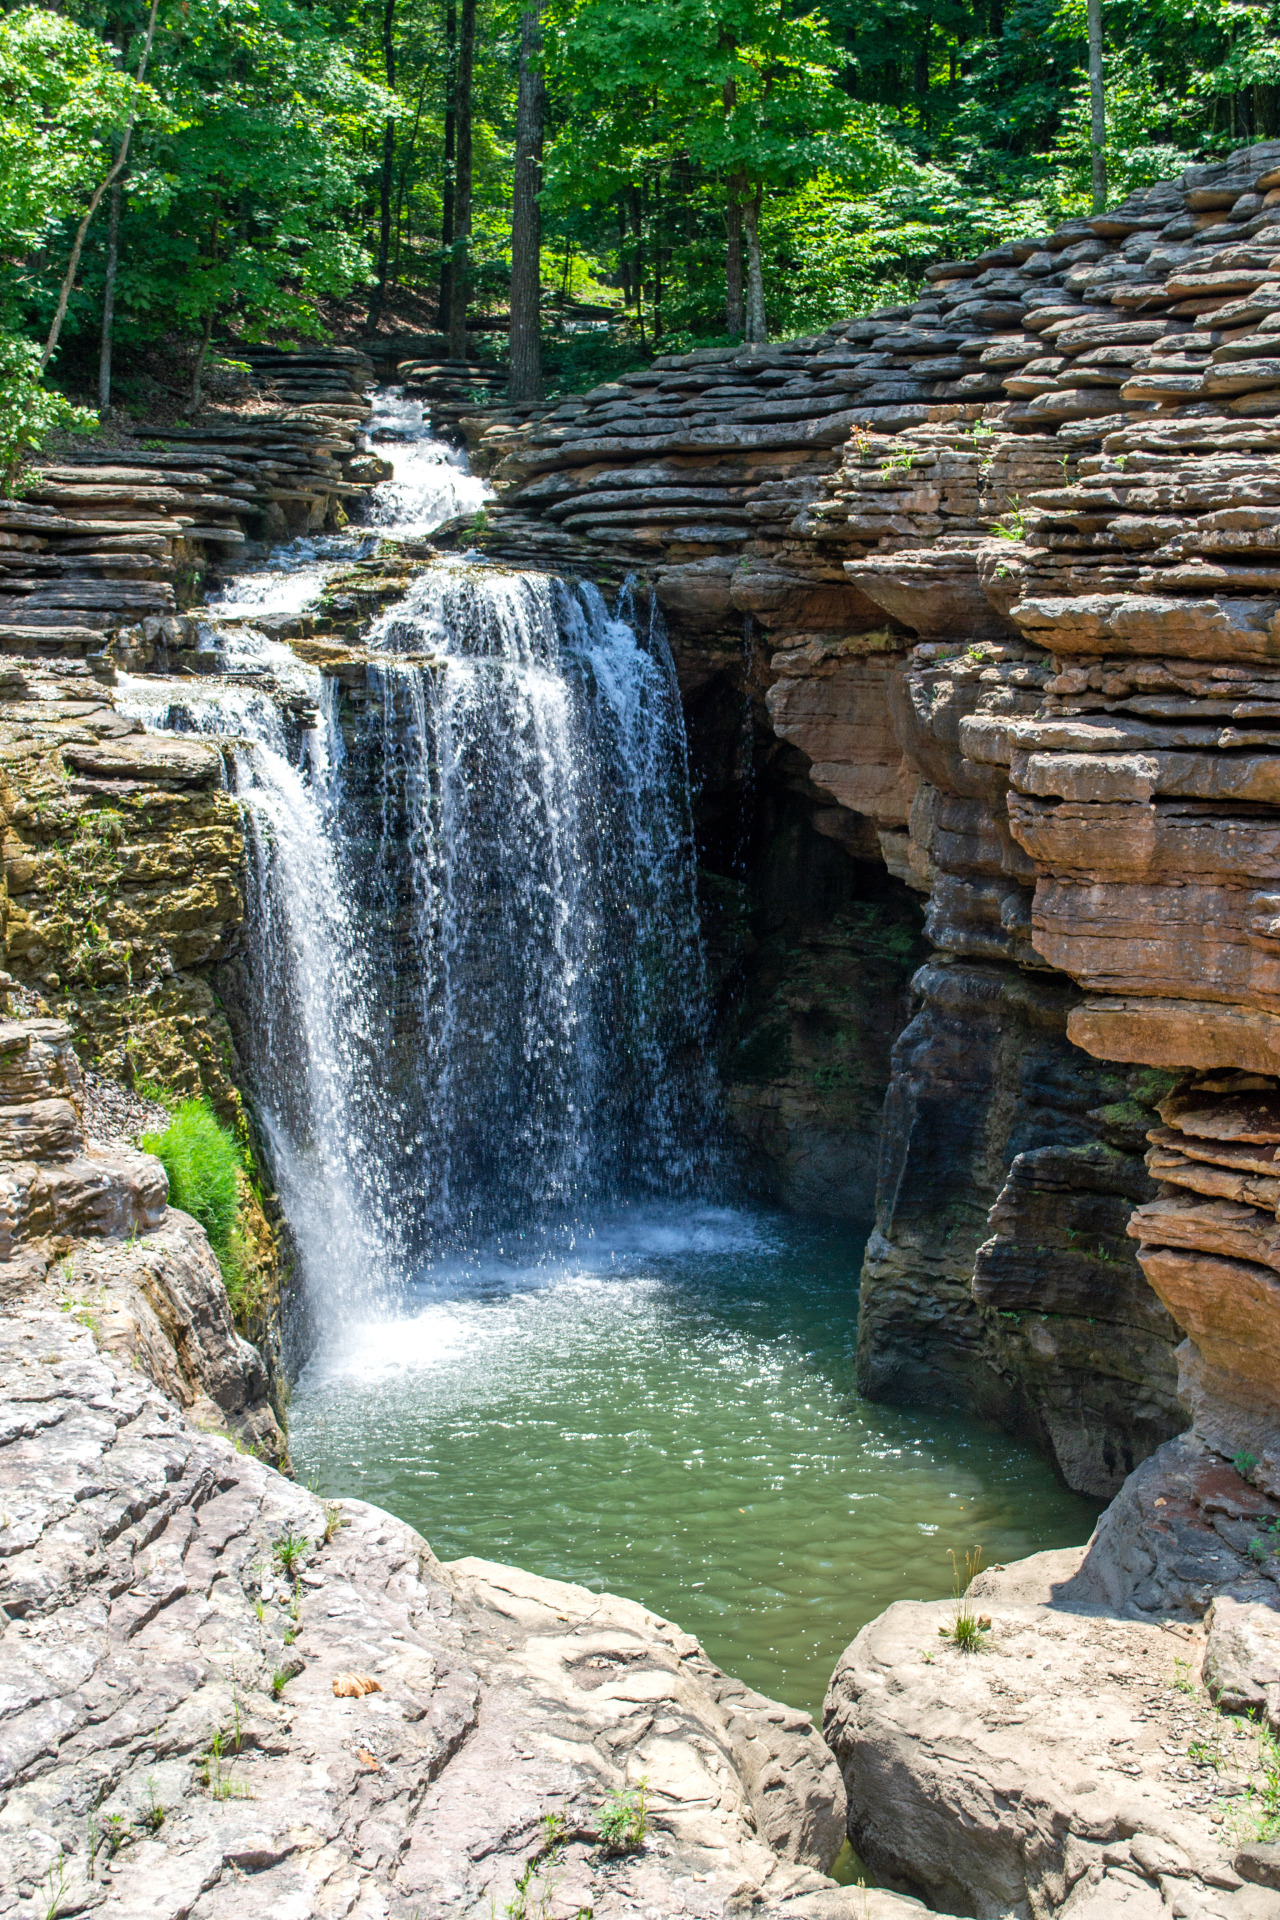 “For all of you who were baptized into Christ have clothed yourselves with Christ.” Galatians 3:27  Photo: Branson, Missouri #baptism#christianity#galatians#galatians 3:27#waterfall#missouri#ozarks#branson#mo#nature#water#ozark mountains#travel#tourism#inspiration#gods word#road trip#adventure#explore#hiking #the great outdoors #midwest #the show me state #gods creation#new life